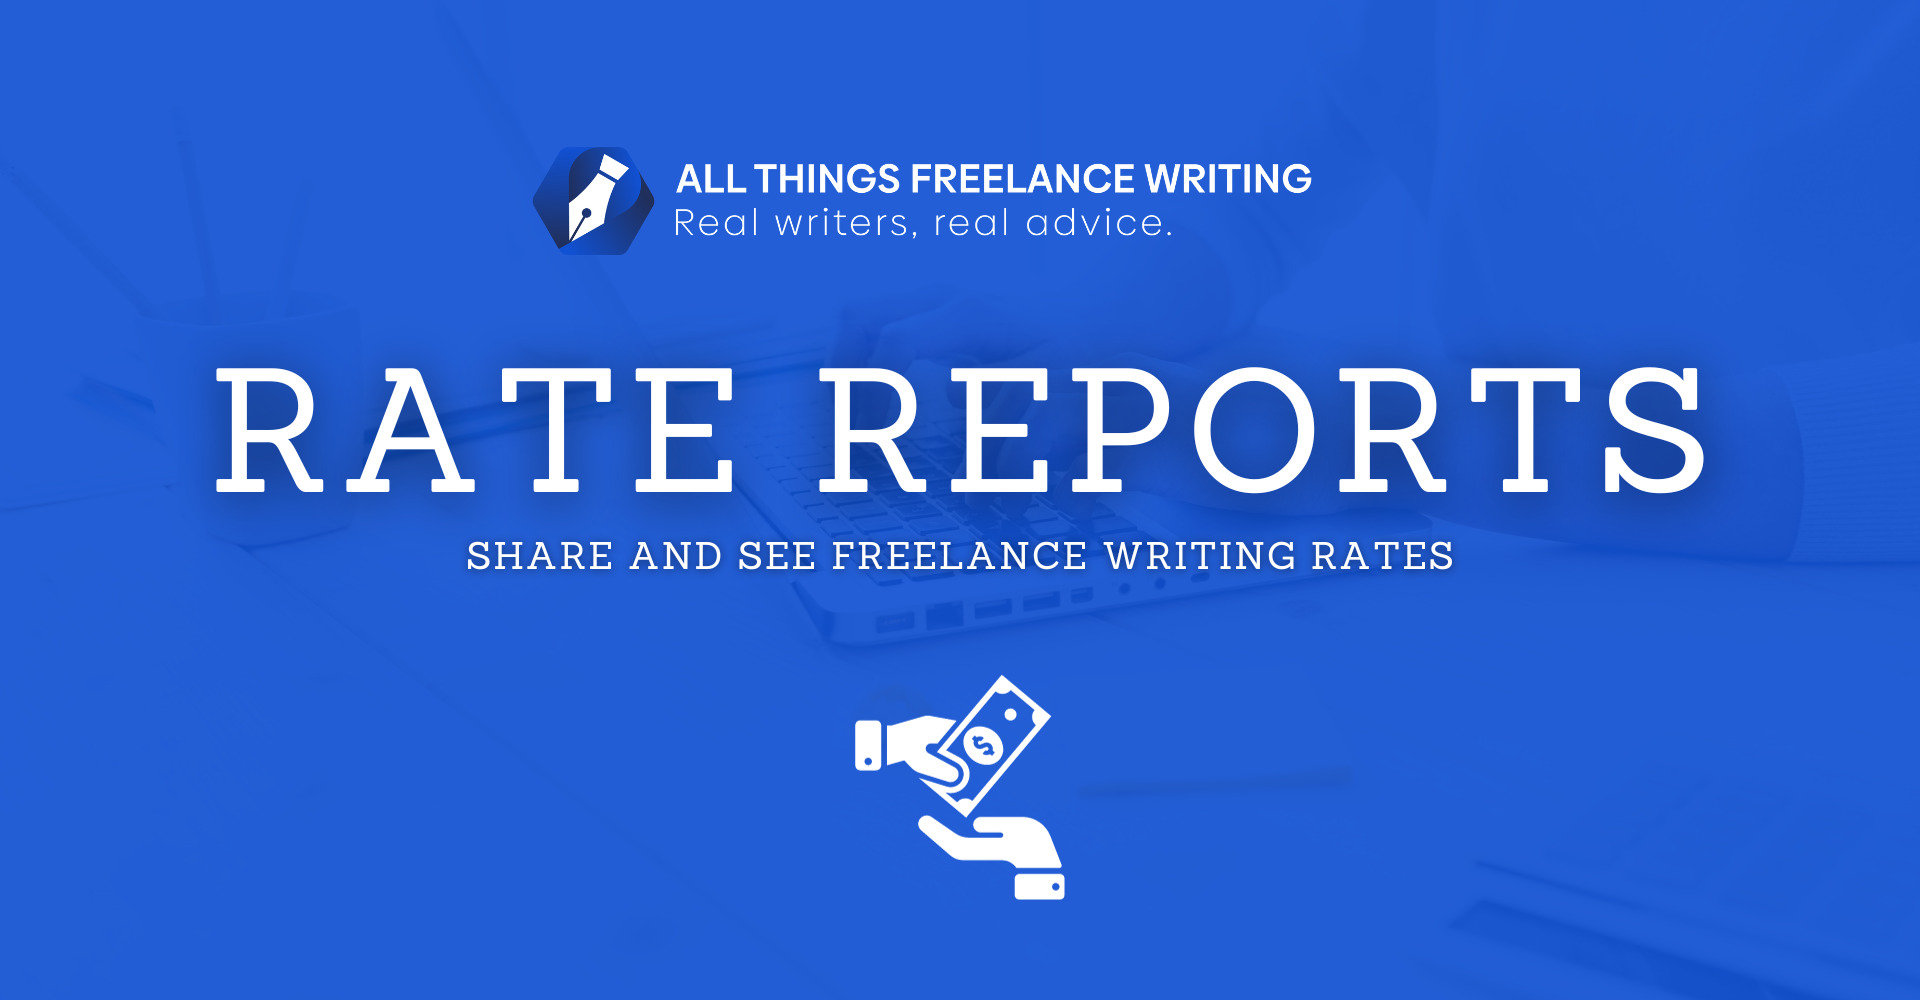 Freelance Writing Rate Reports